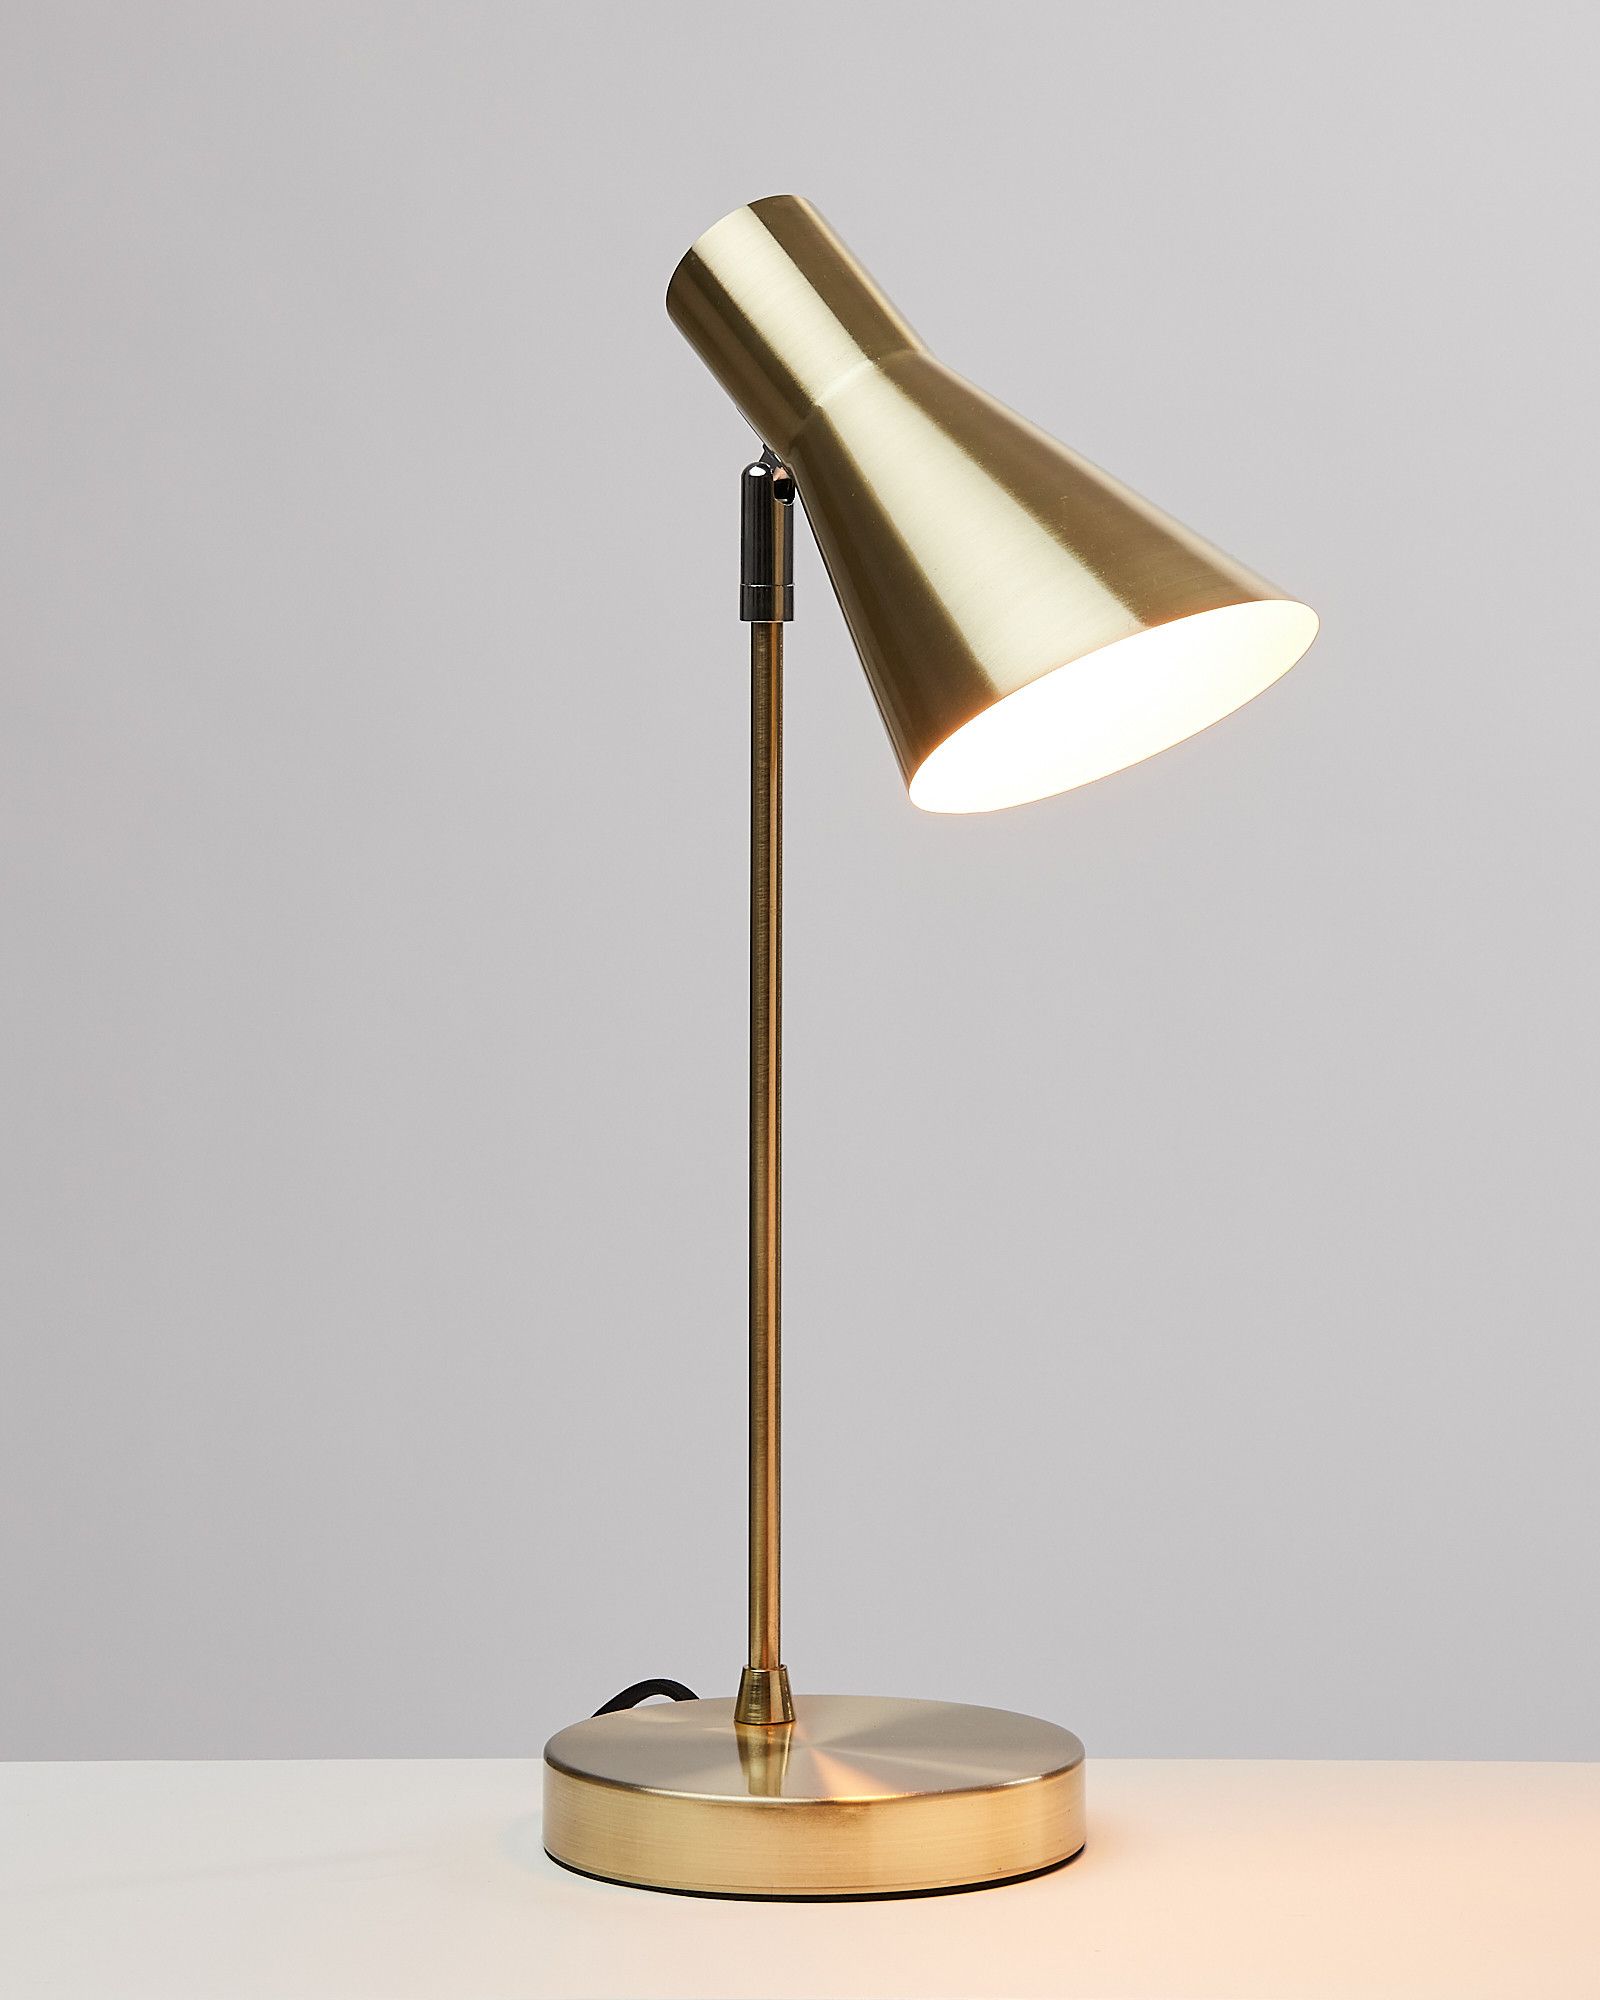 Gold Desk Lamp Uk - Get the best deal for gold desk lamps from the